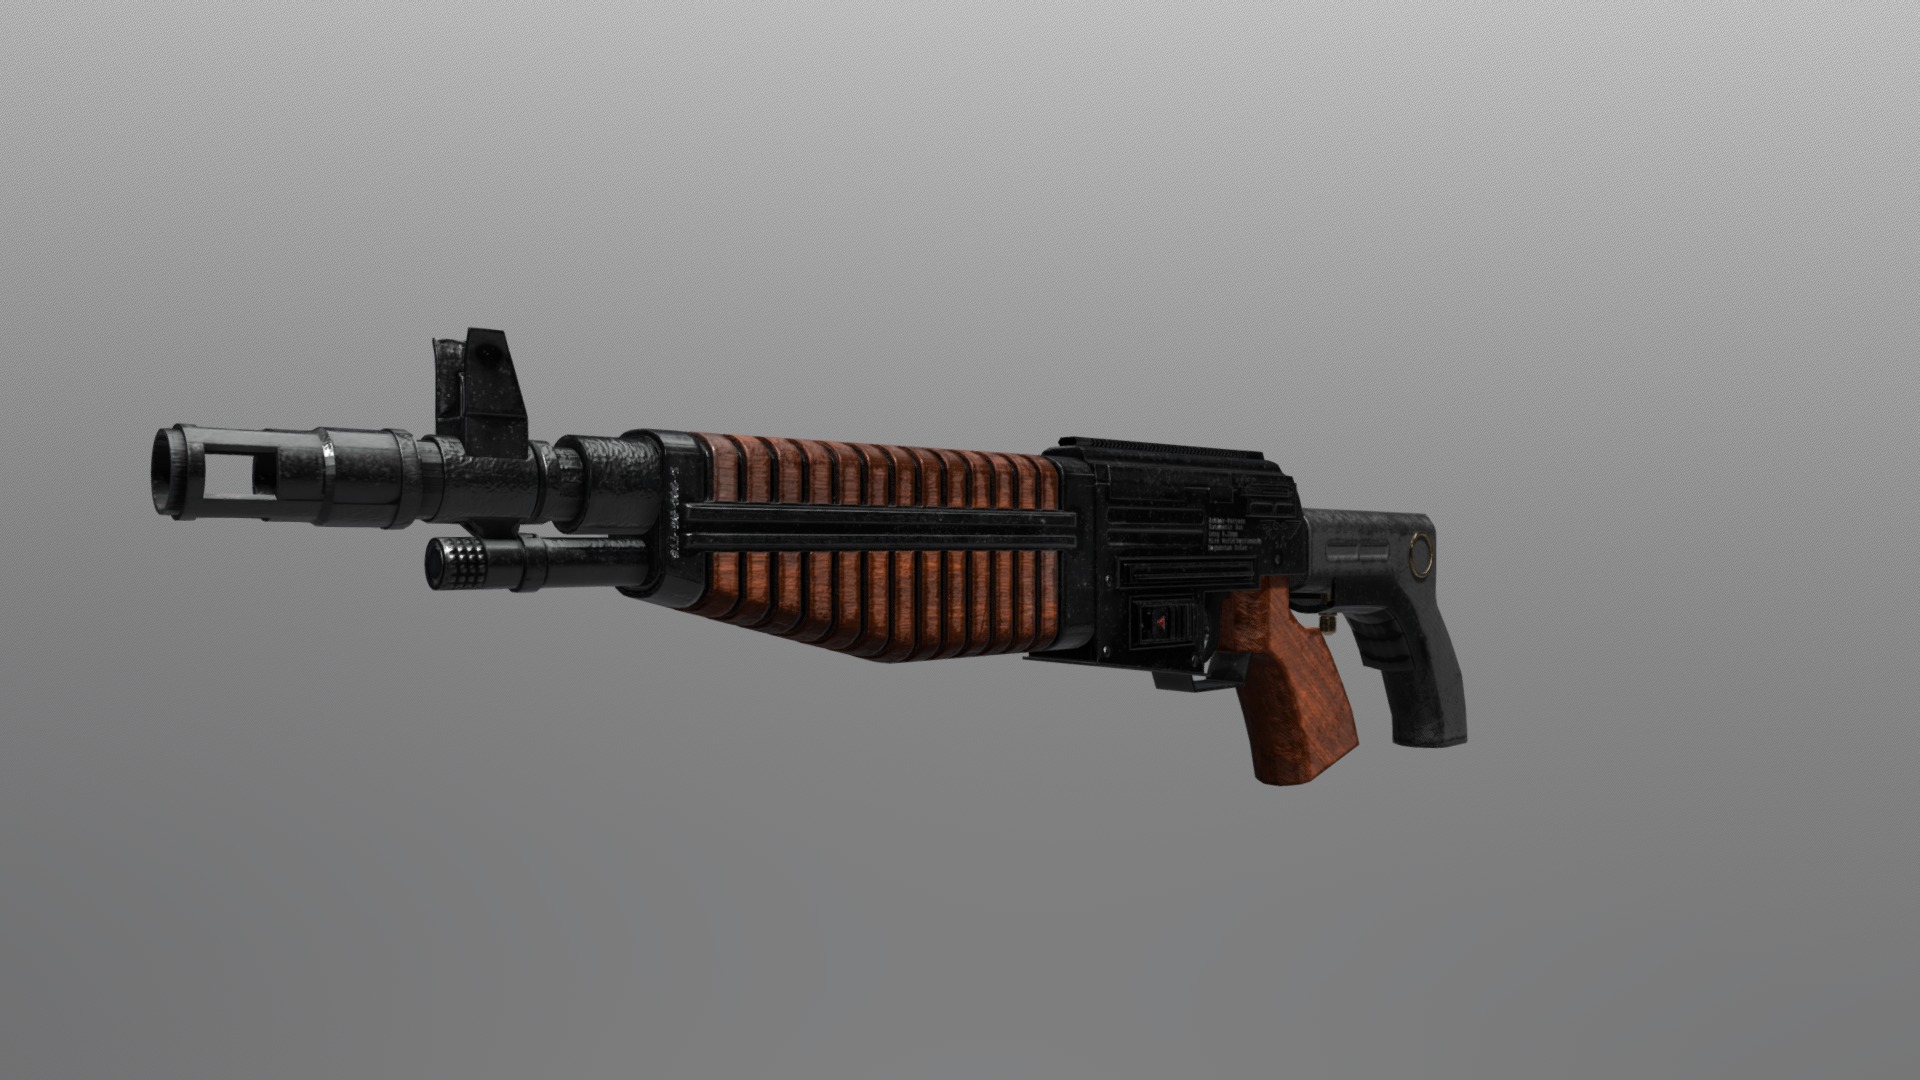 House Escher-Pattern Autogun. Typical weapon of House Escher fron the Hive World of Necromunda.

Made for There is Only War Mod for ARMA III

Link: https://steamcommunity.com/sharedfiles/filedetails/?id=1160452826 - House Escher Autogun - Necromunda - 3D model by kommissarazura 3d model